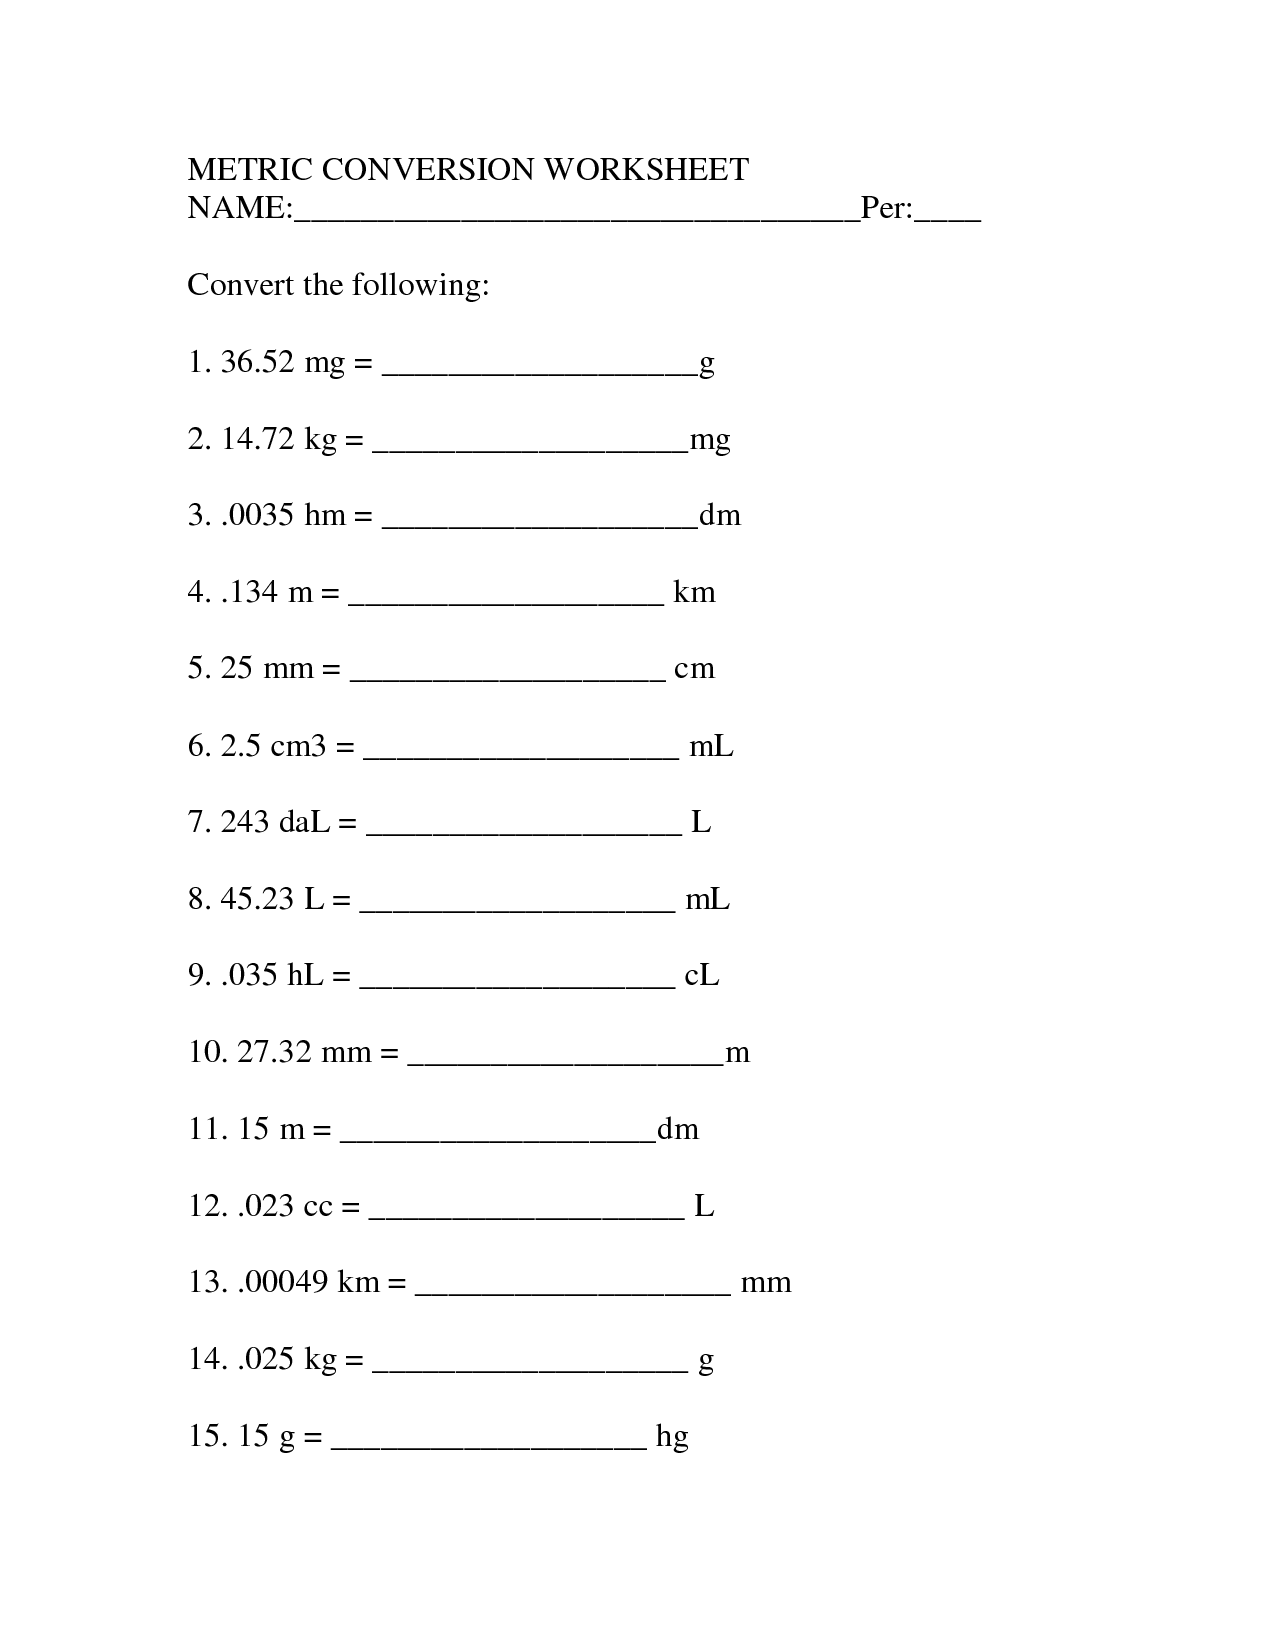 metric-measurement-conversion-worksheet-for-4th-5th-grade-lesson-planet